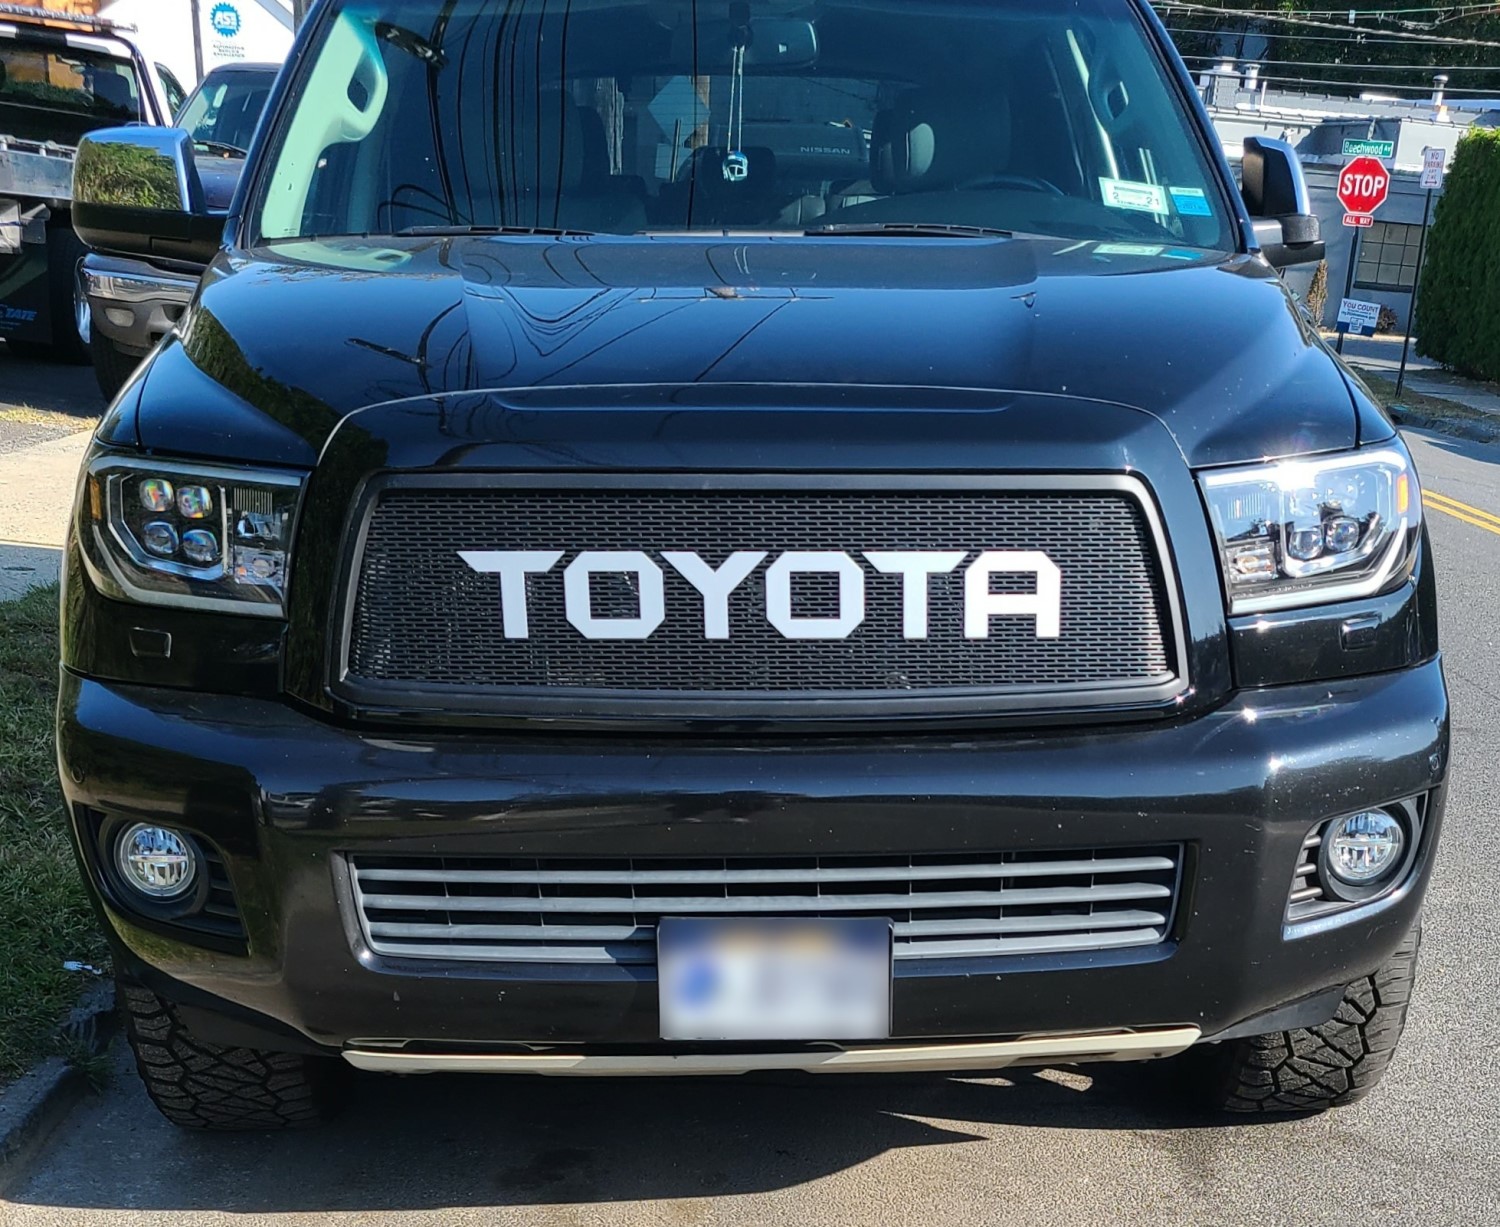 New Custom Grille for Toyota Sequoia: Sleek and Stylish